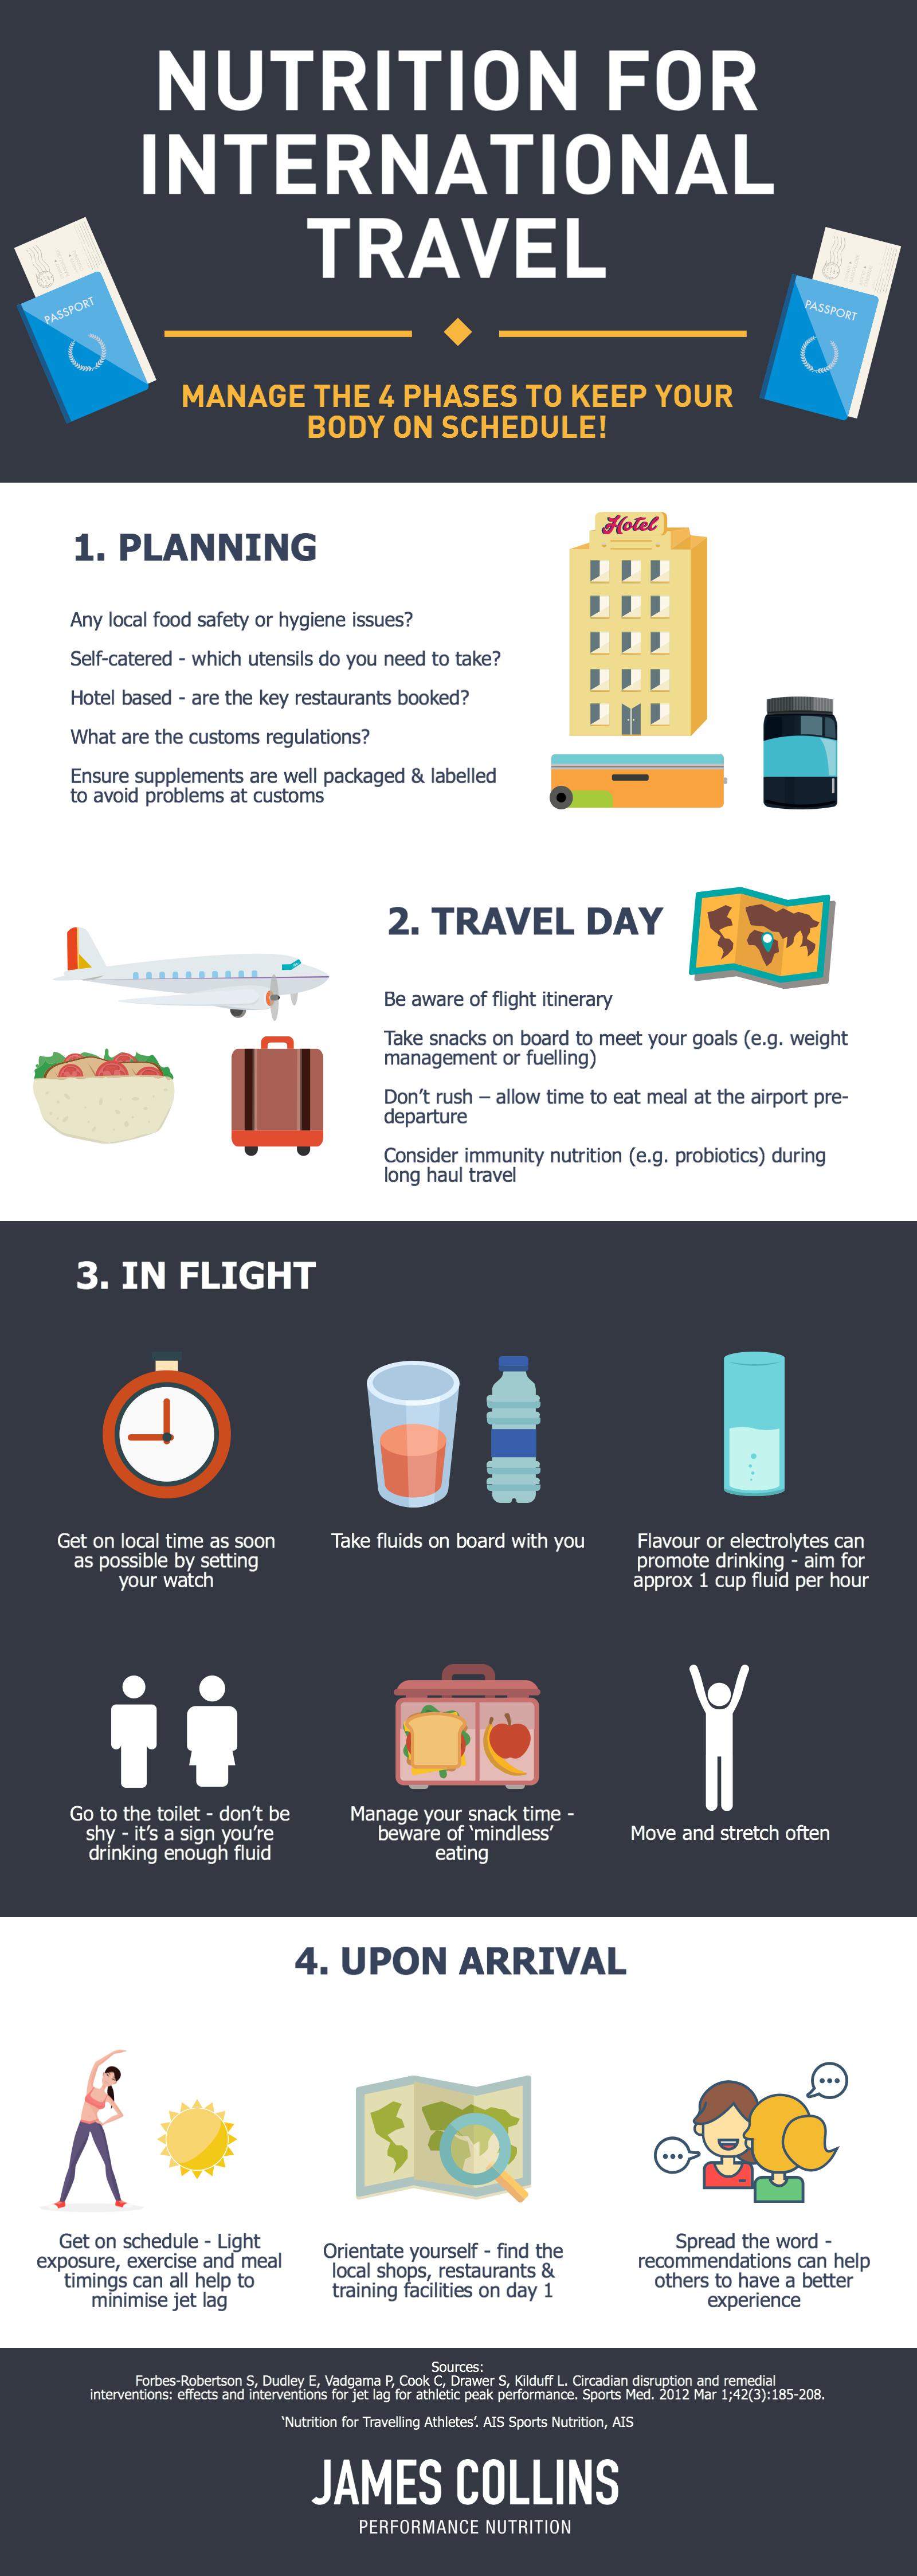 III. Planning Ahead: Preparing Nutritious Meals for Travel